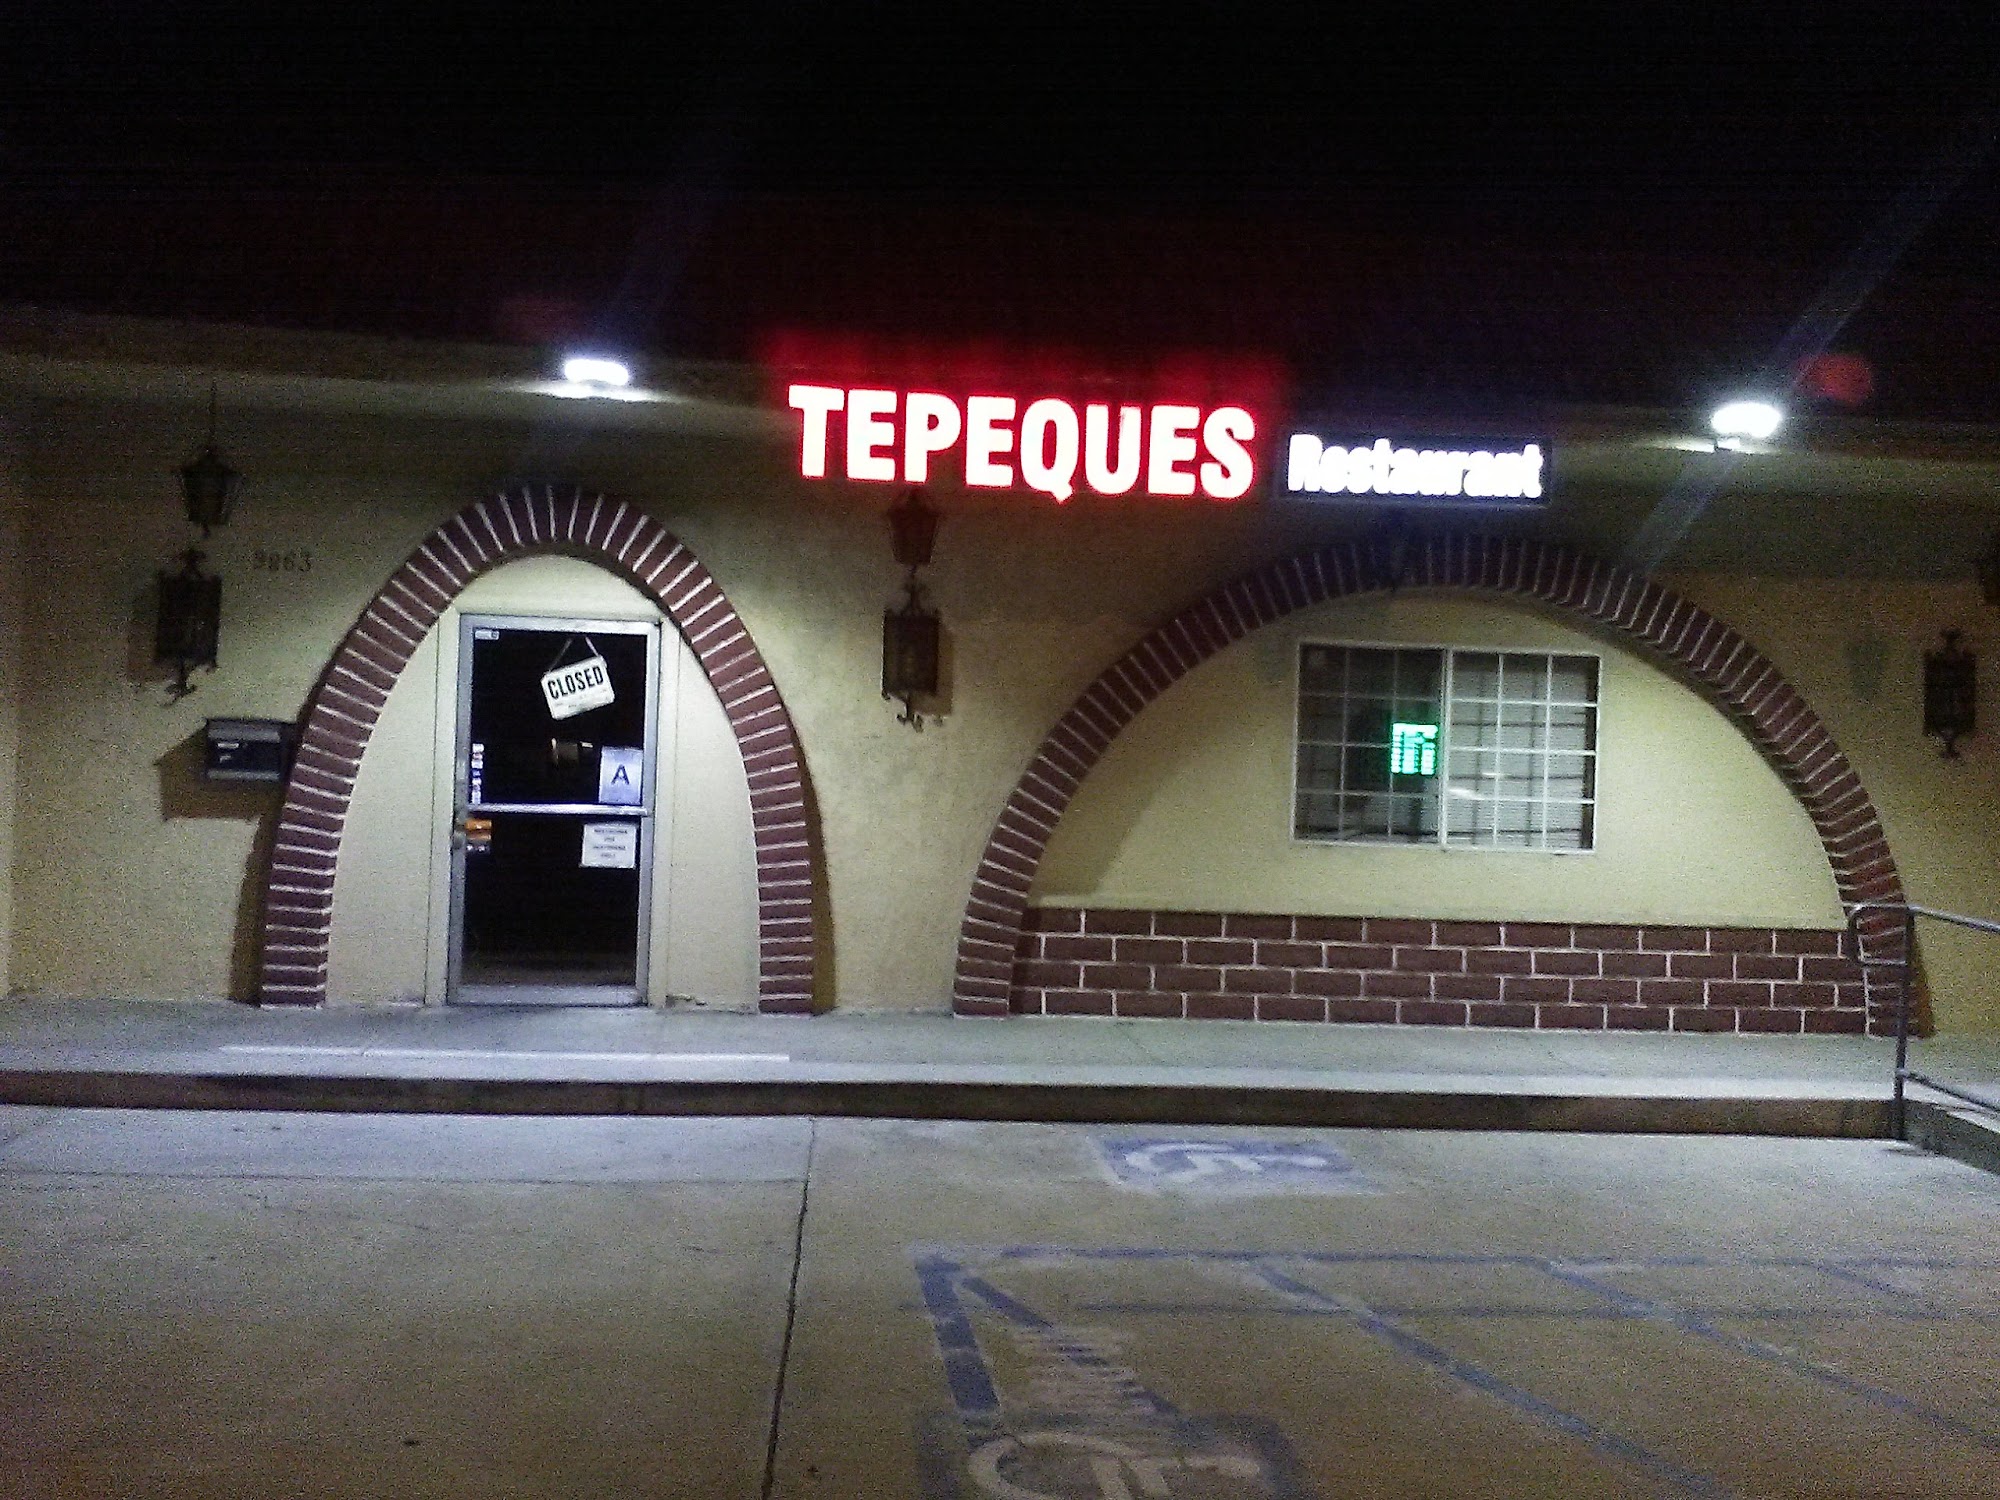 Tepeque's Mexican Food Restaurant